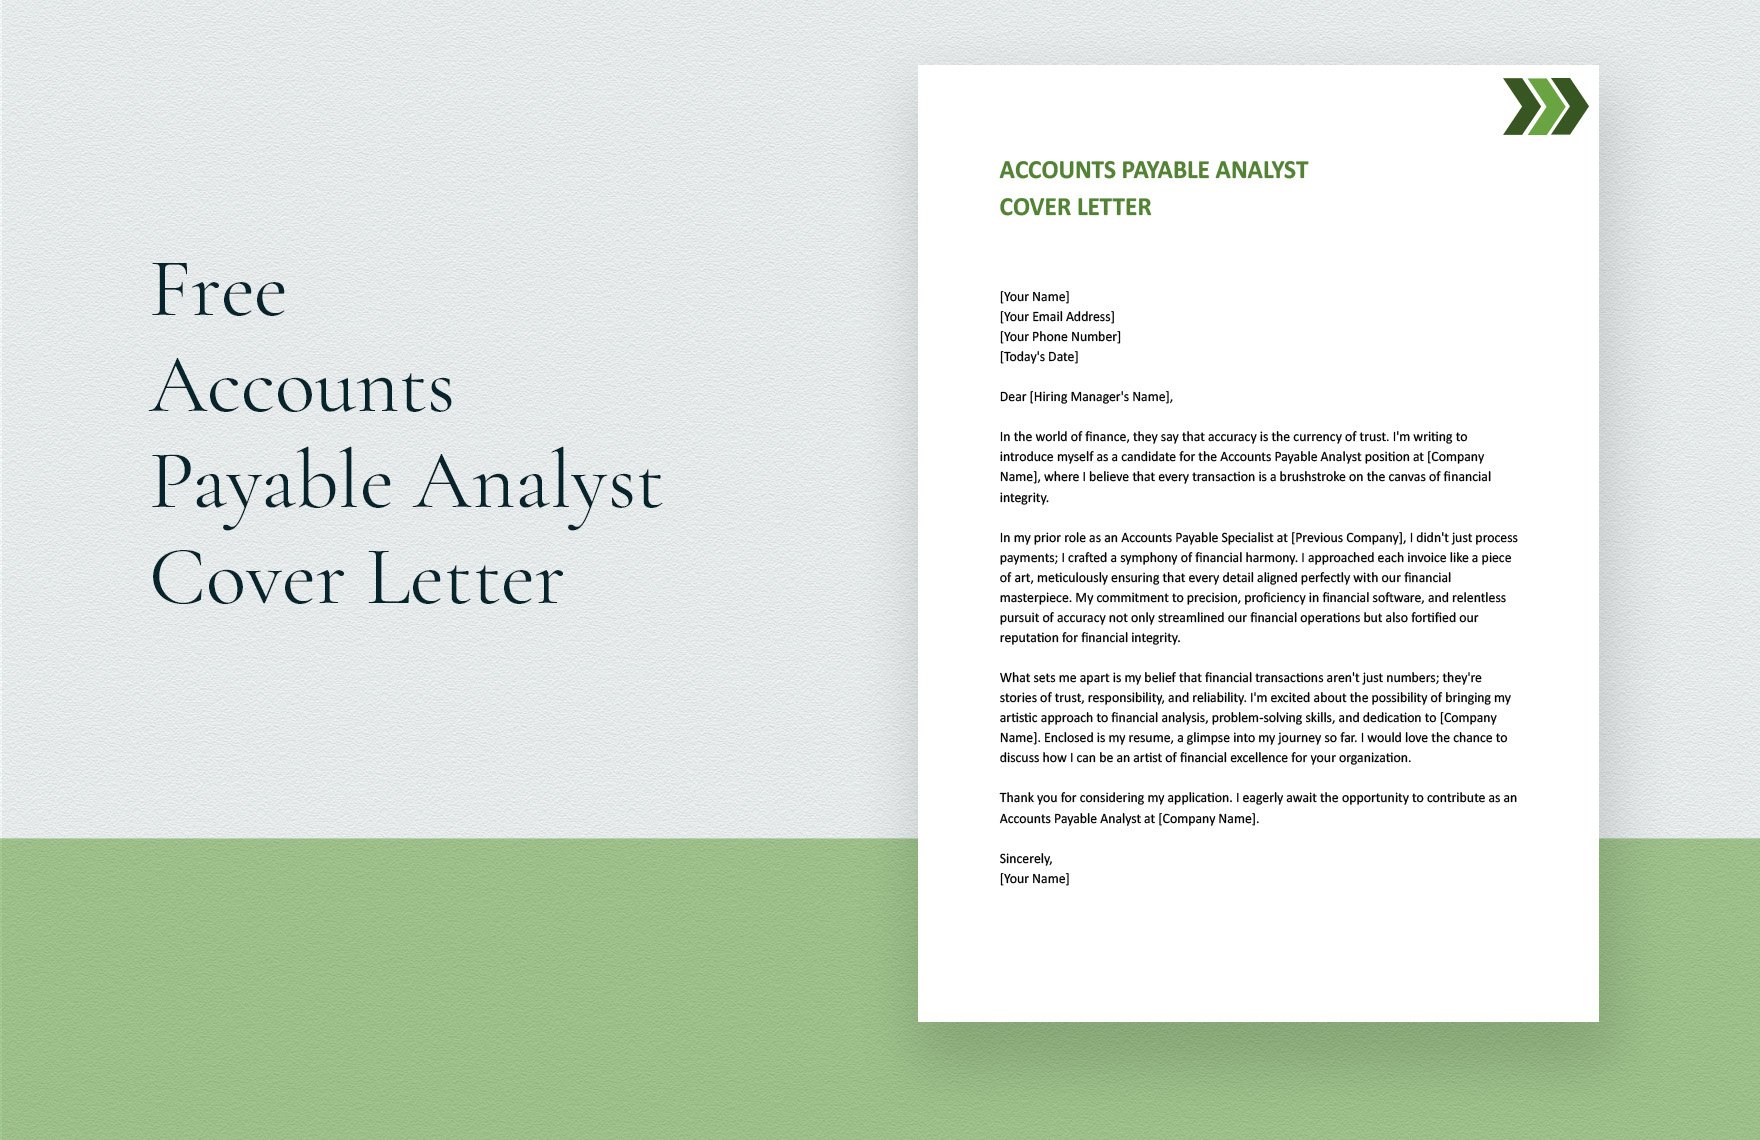 Accounts Payable Analyst Cover Letter